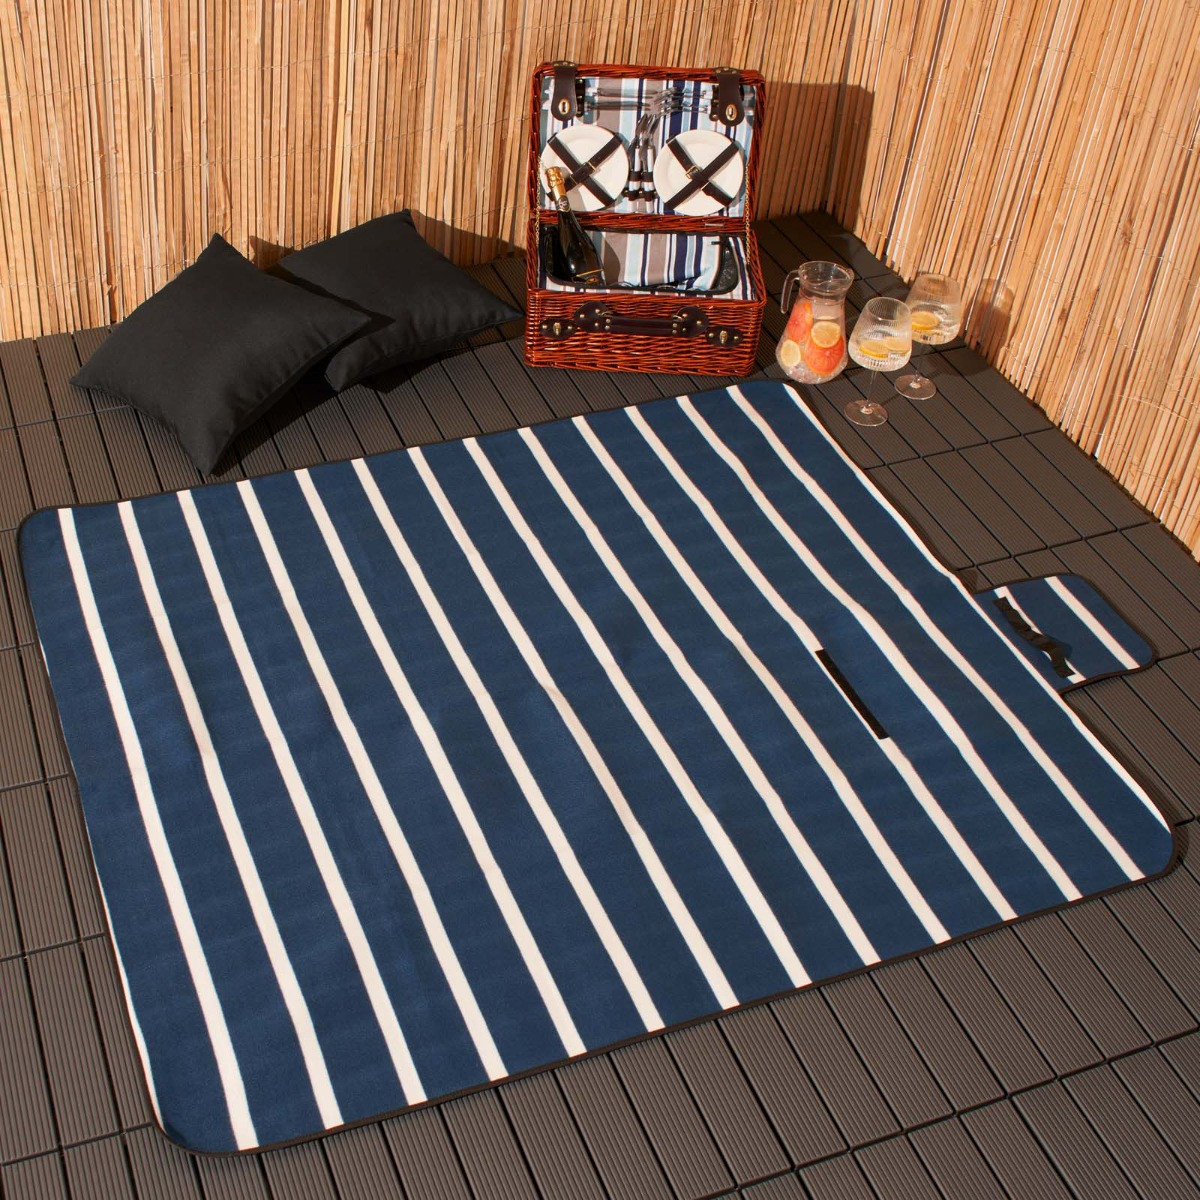 OHS Foldable Picnic Blanket, Navy And White Stripe - 130 x 150 cm>